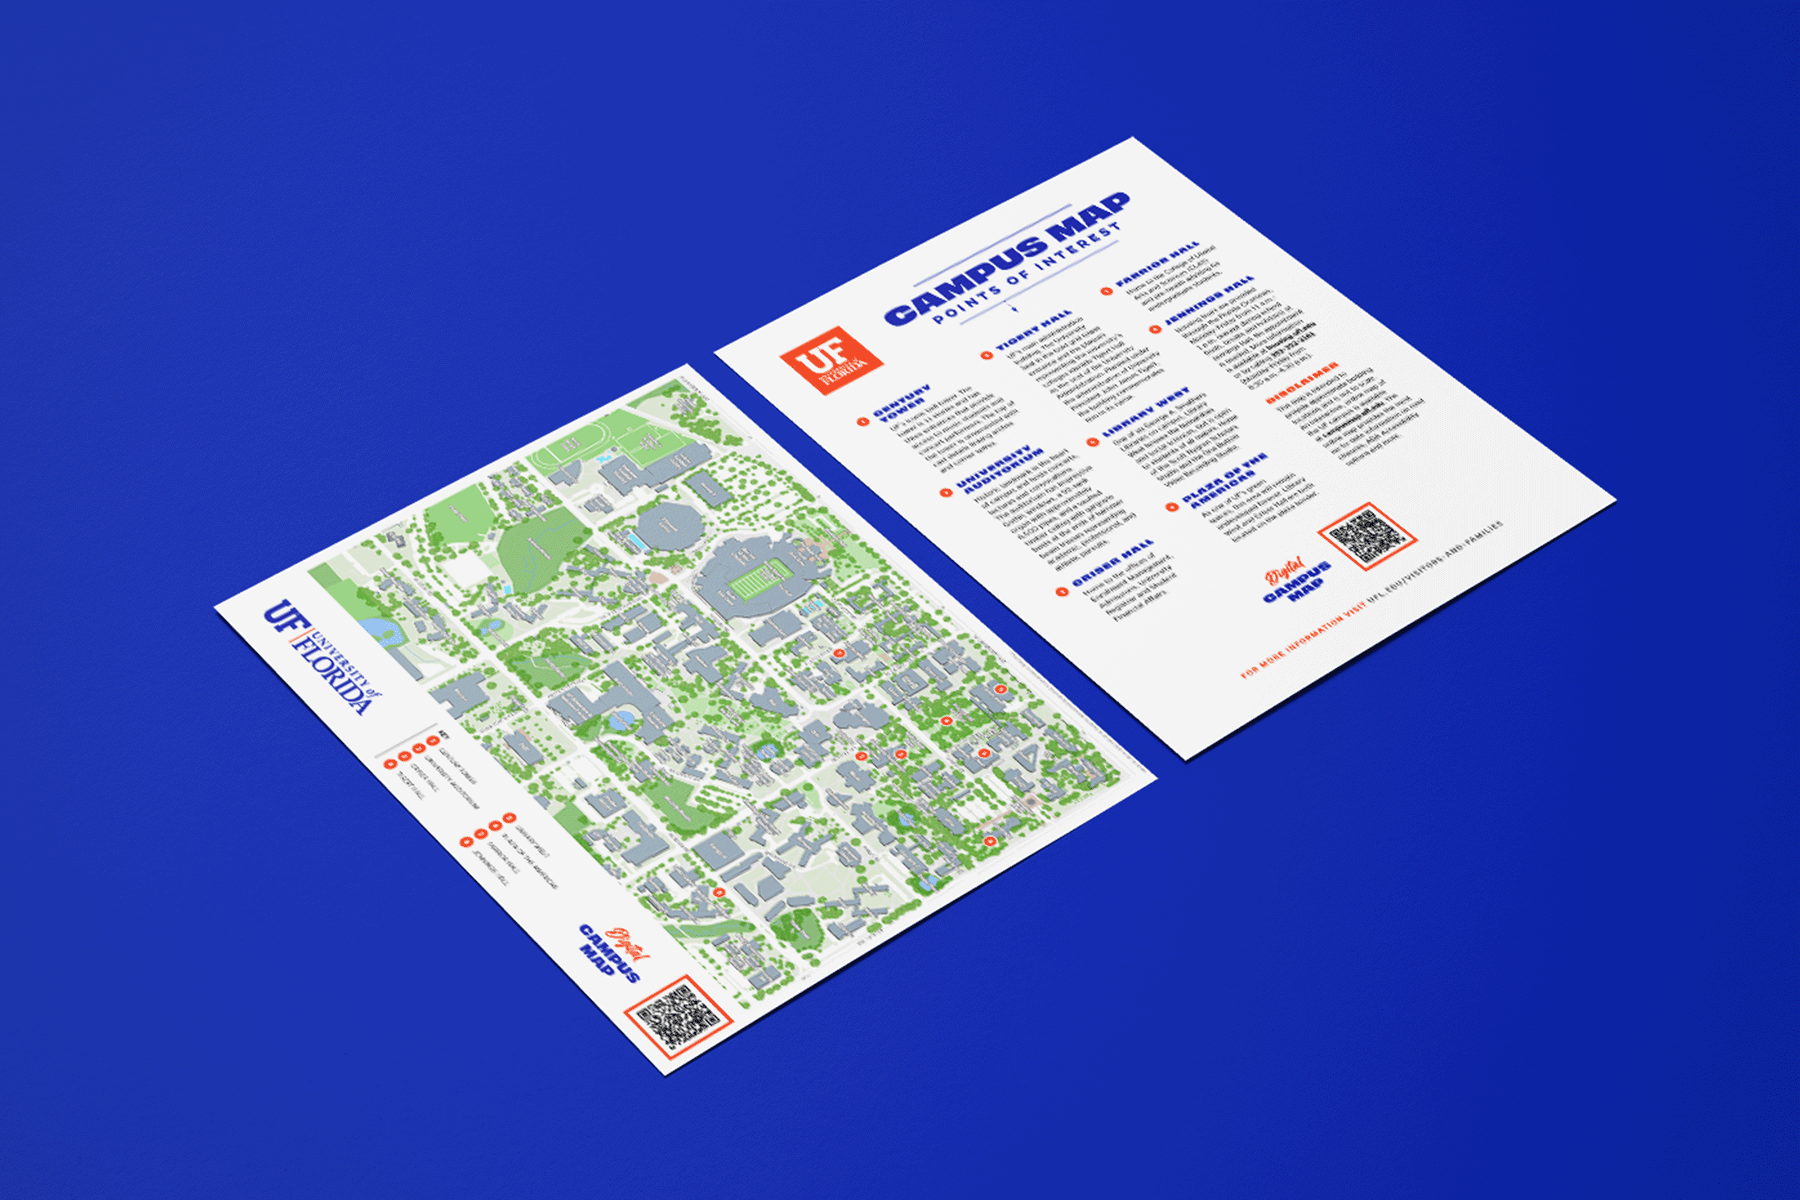 Double-sided campus map print-out mockup showing points of interest on a standard map and a detailed guide to each point of interest on the back.